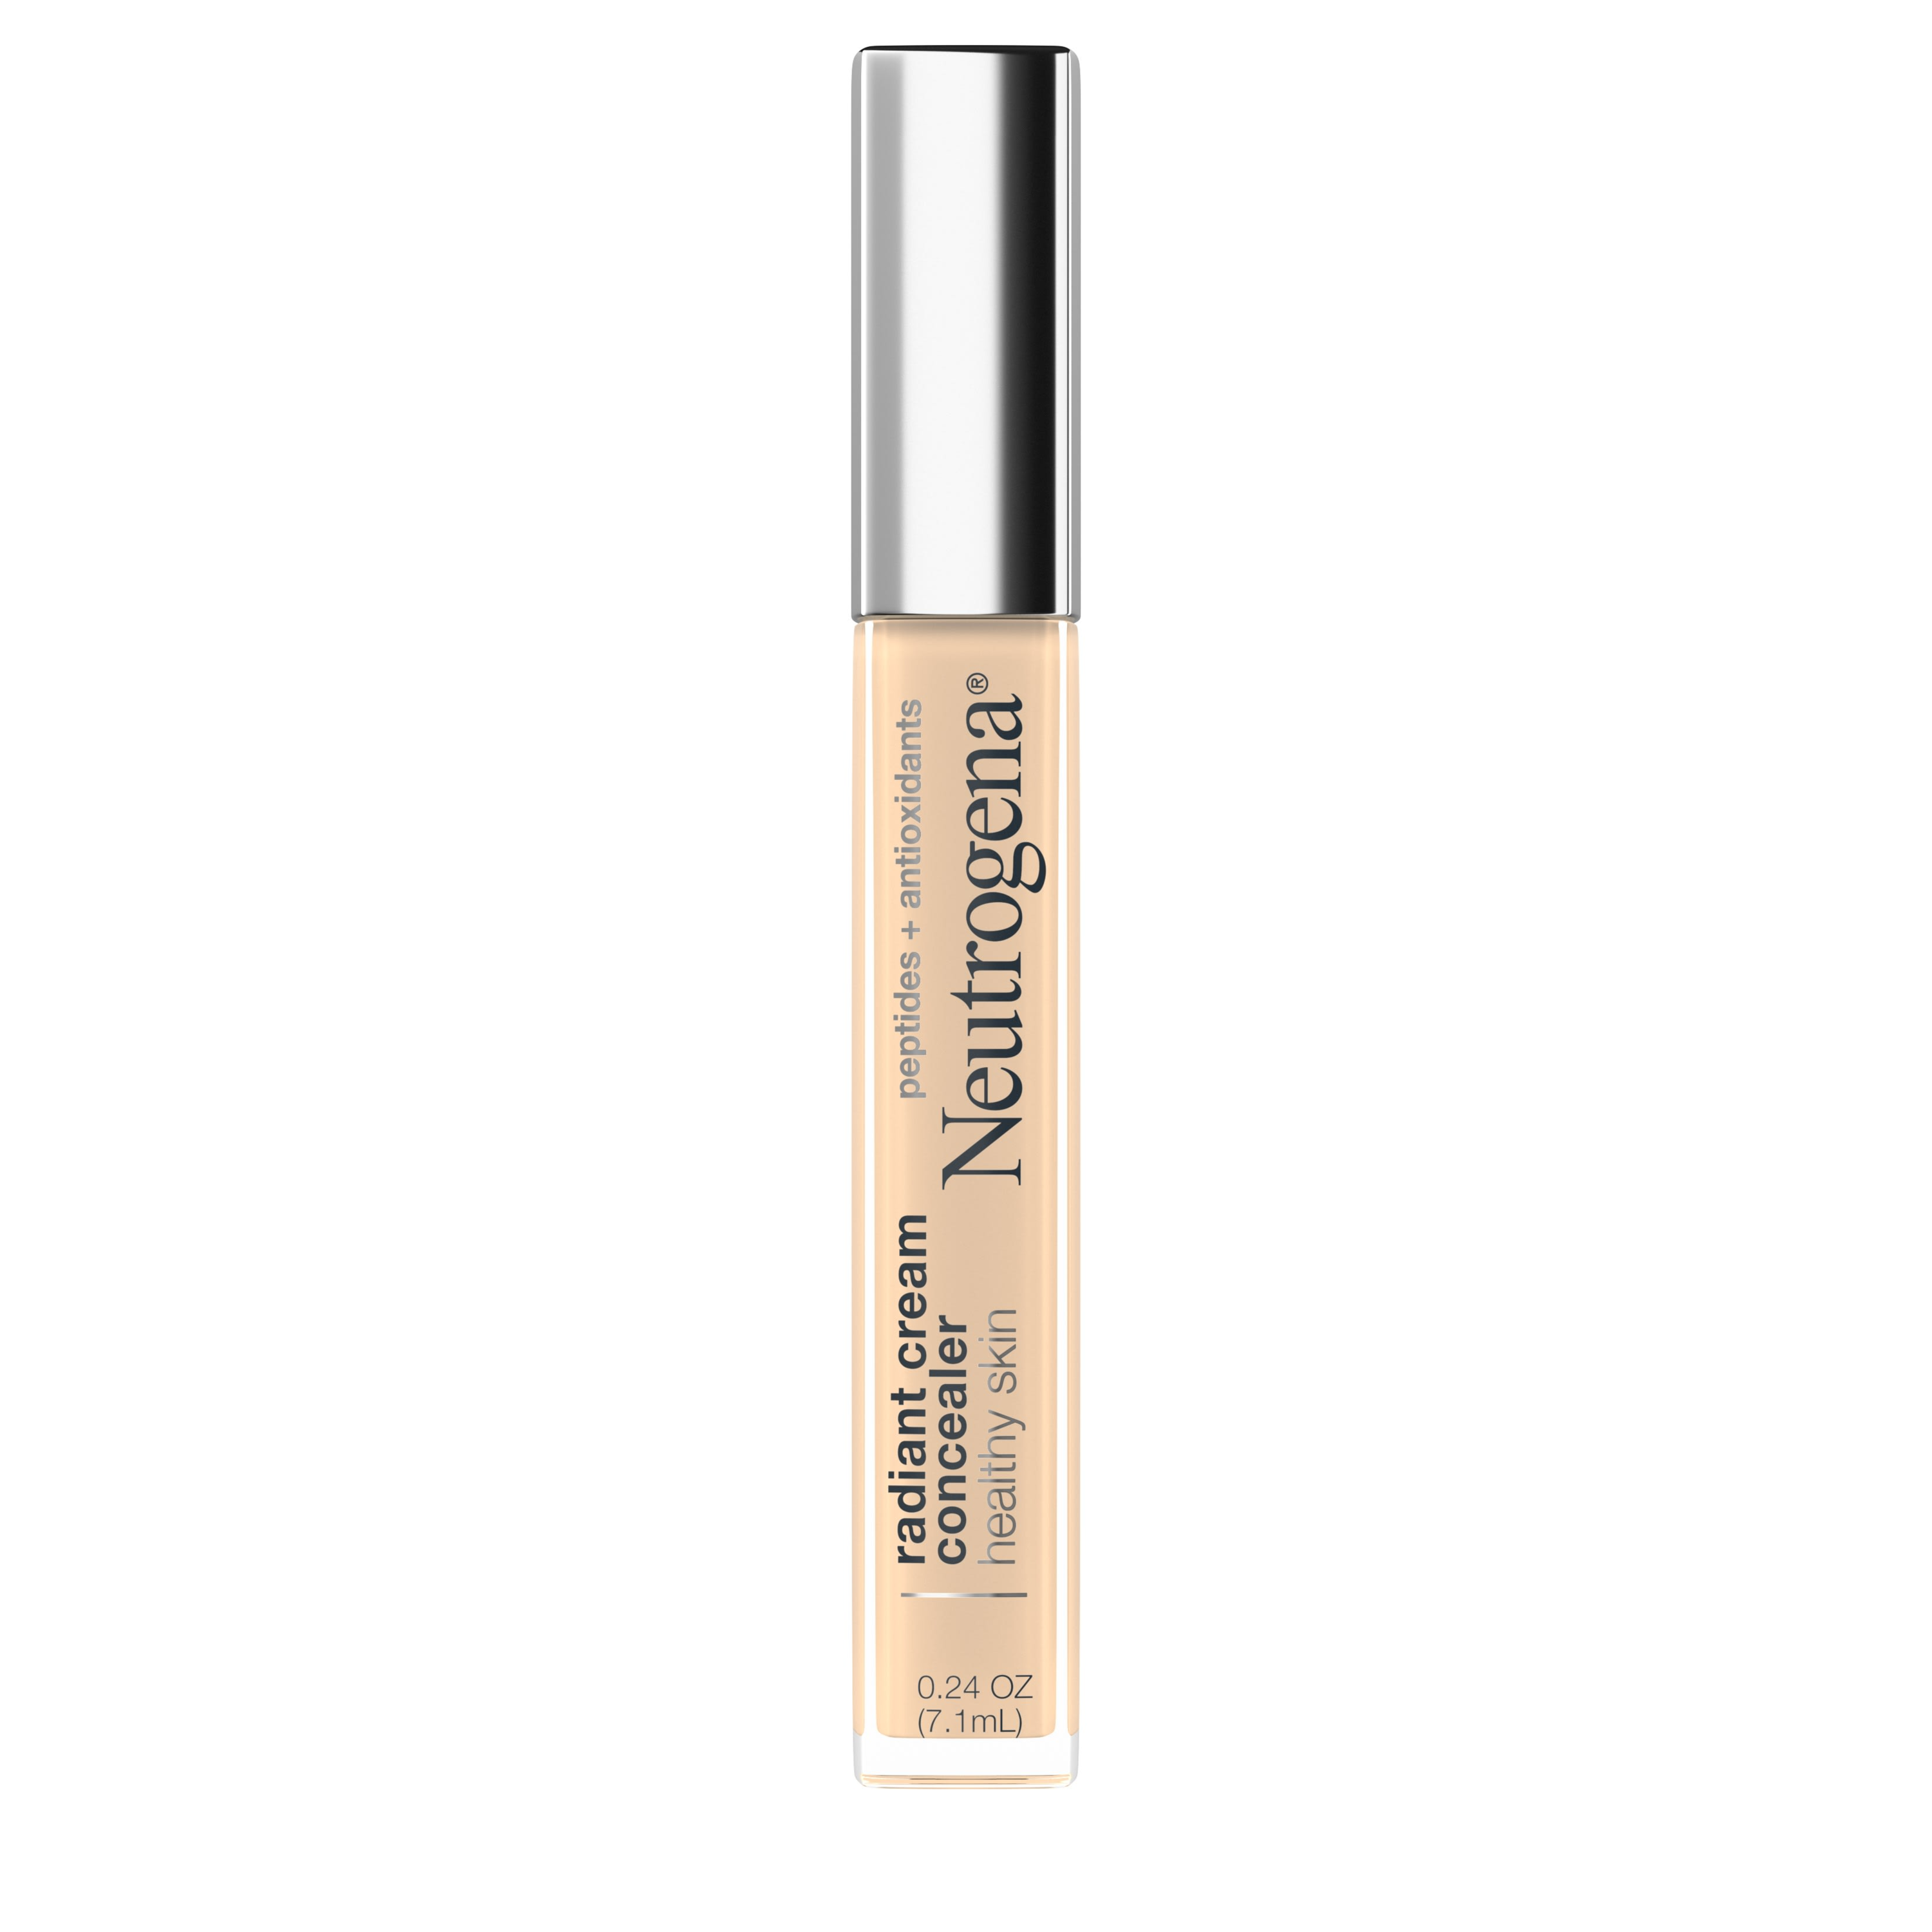 Another tube of concealer